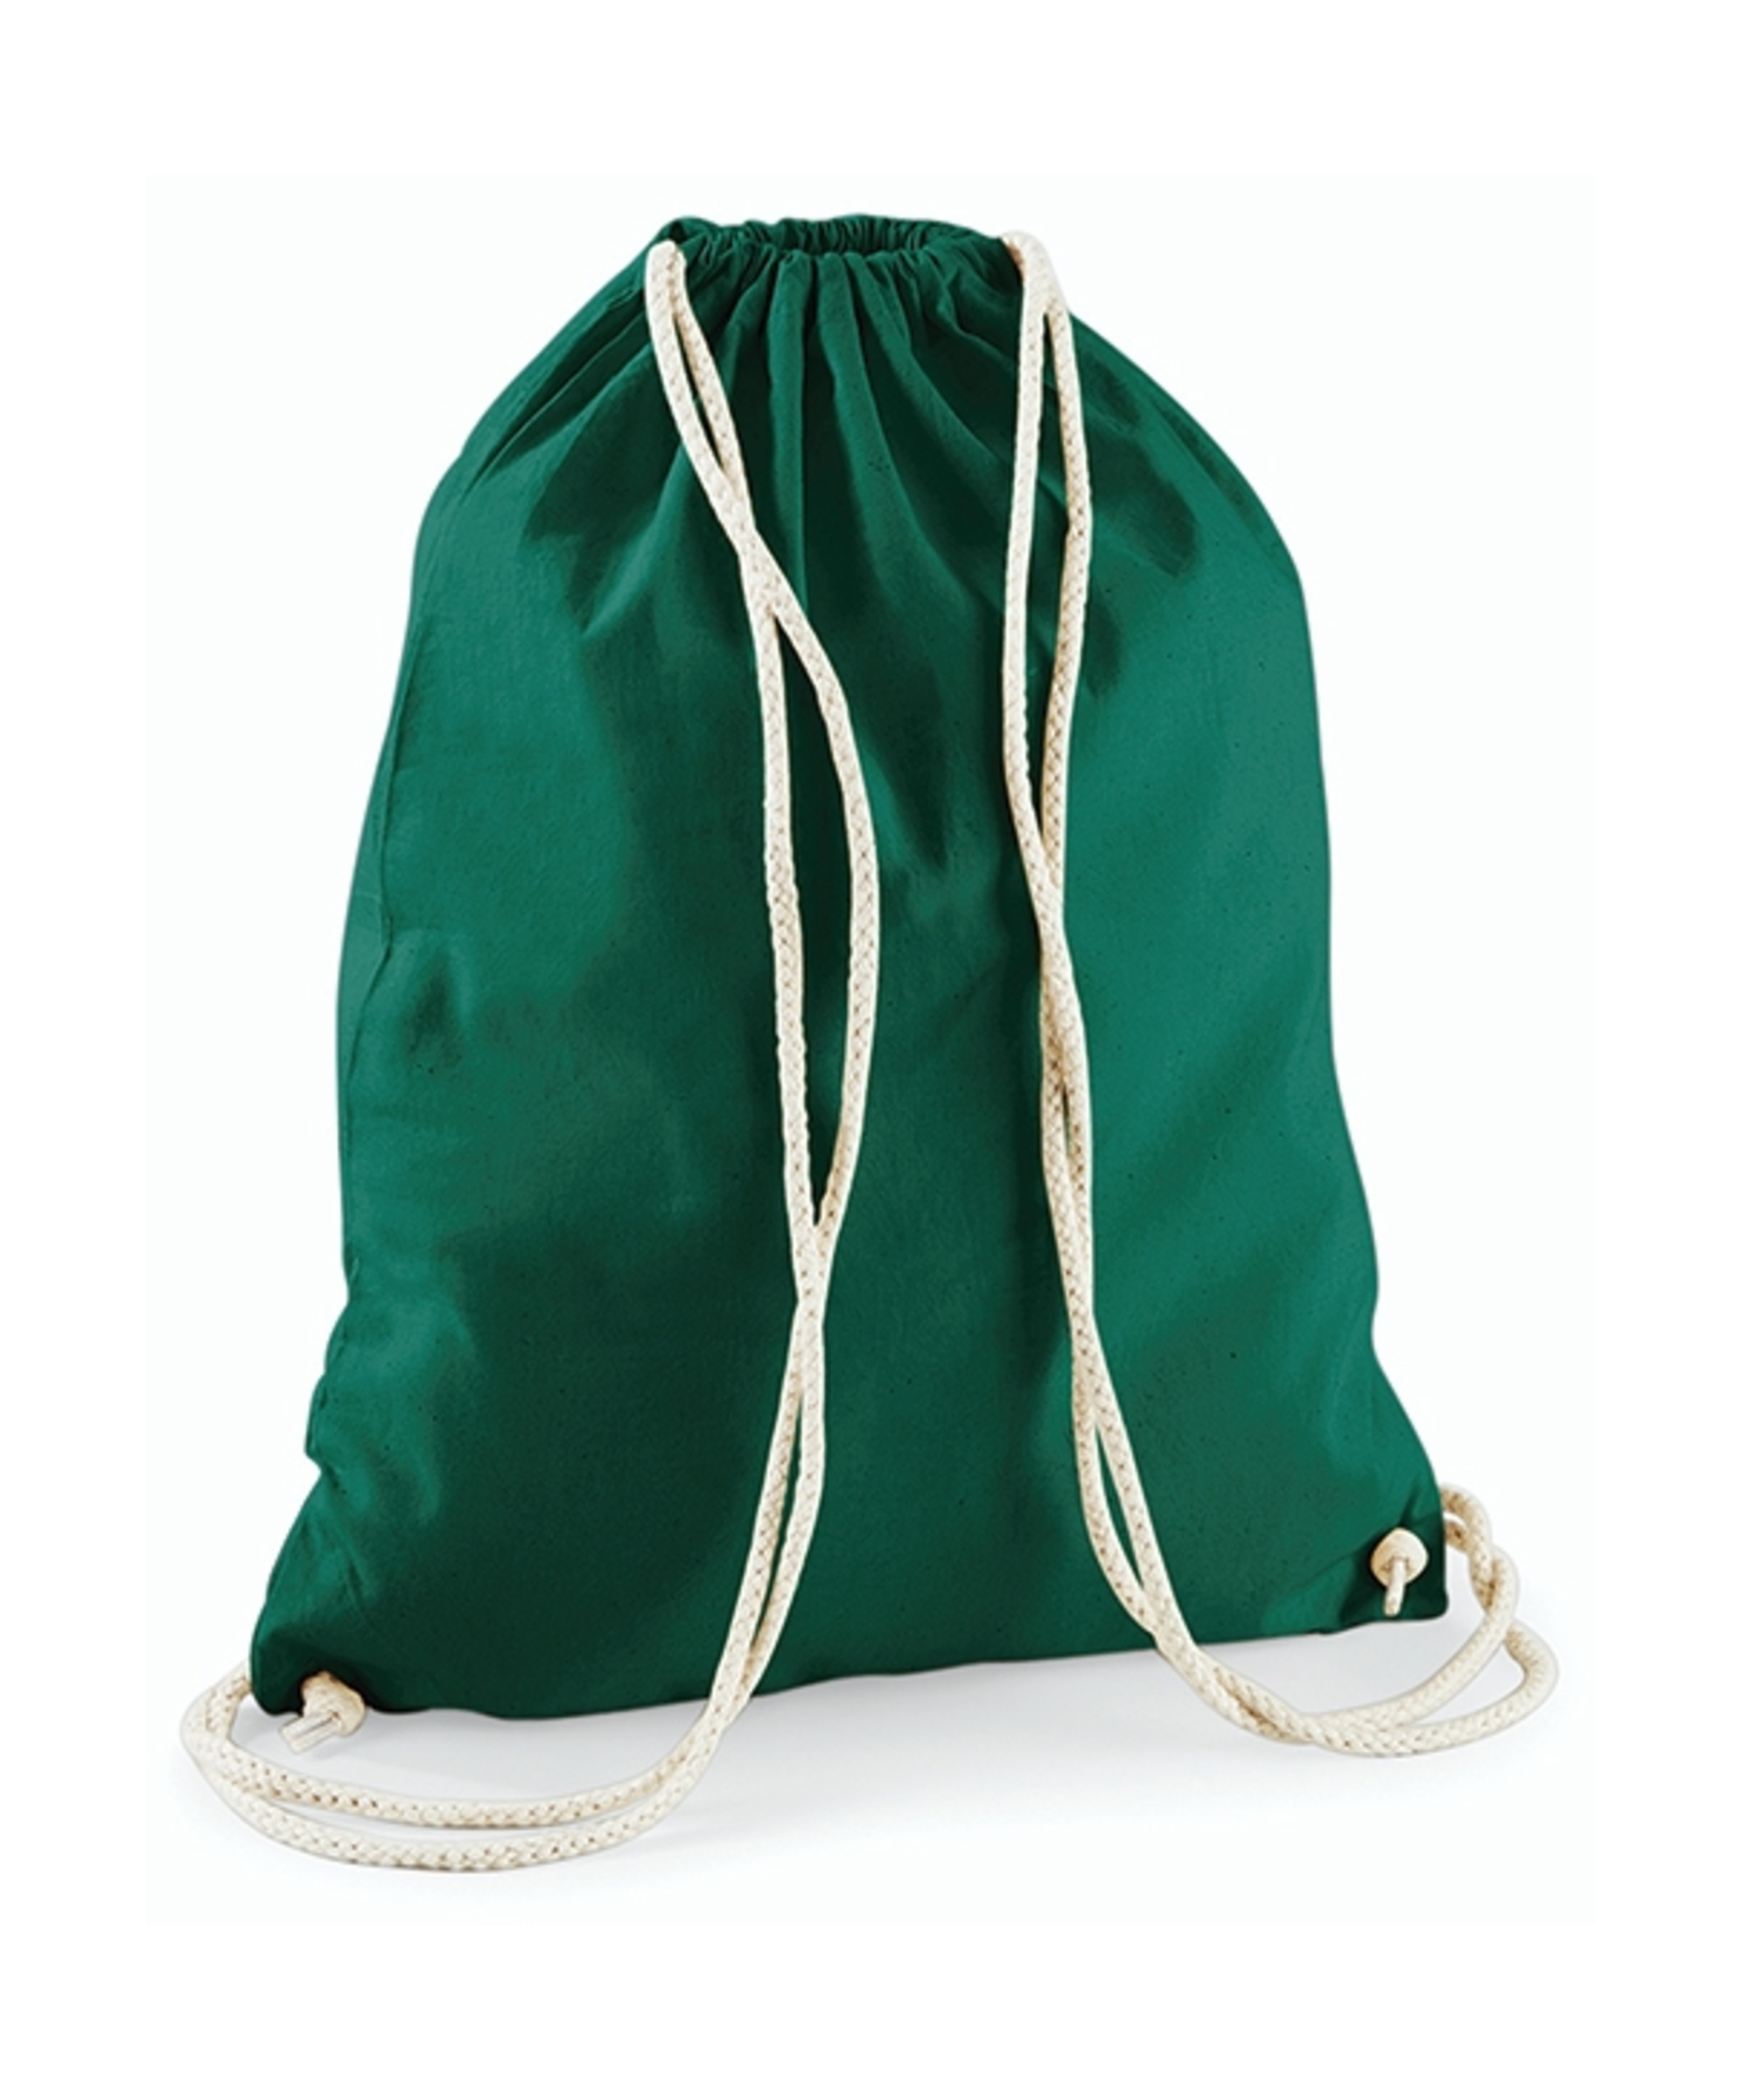 Westford Mill Cotton Gymsack - Bottle Green - One Size